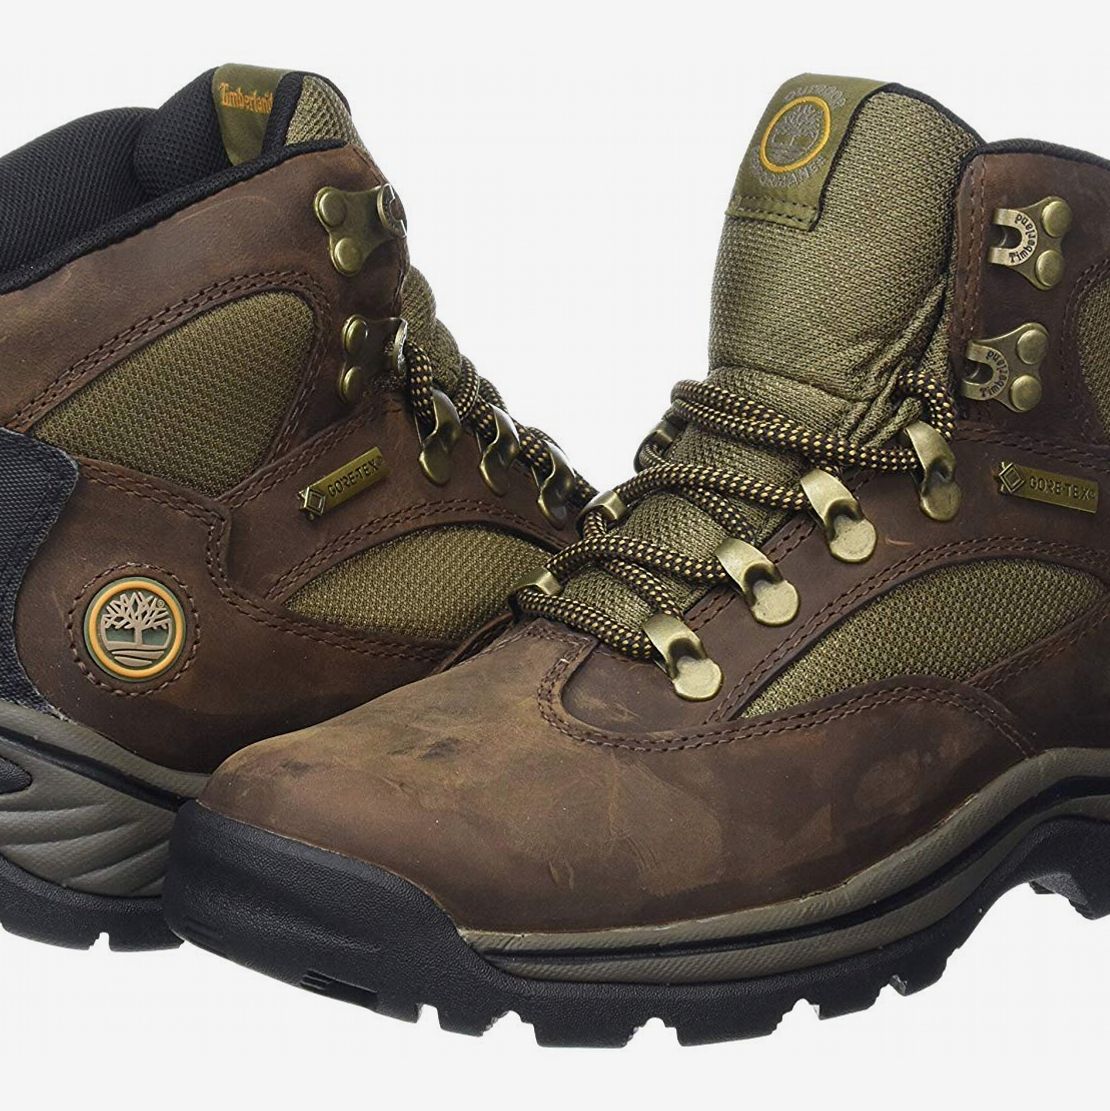 16 Best Women's Hiking Boots 2020 | The 